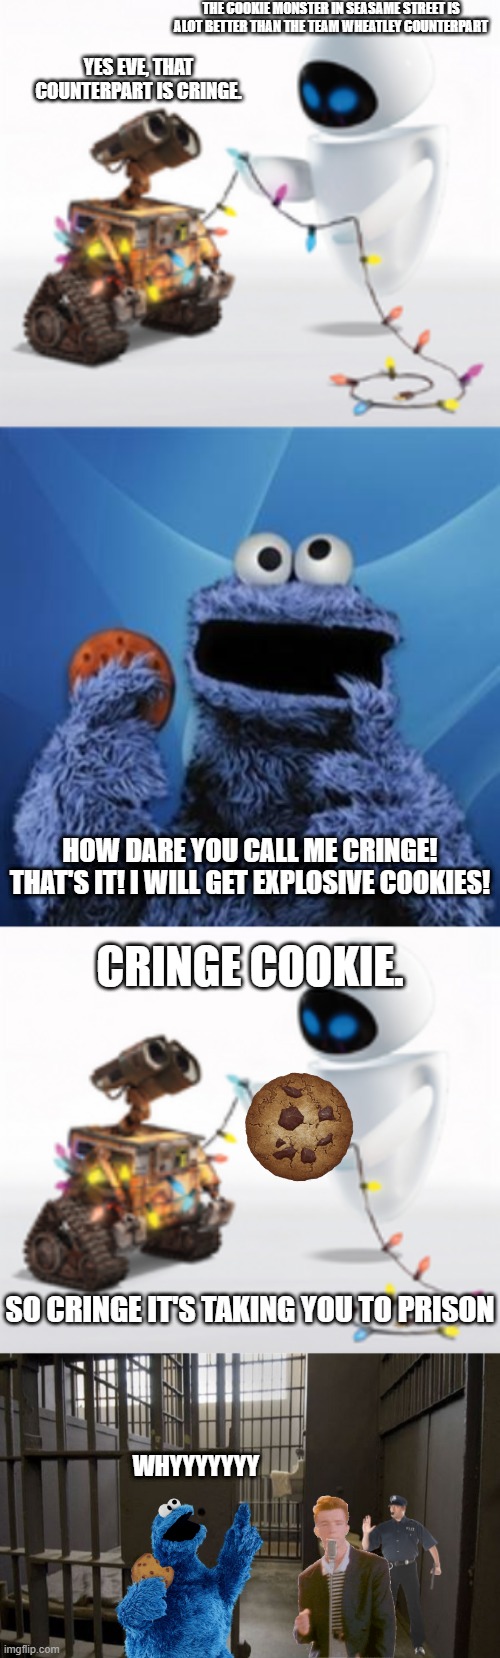 Messing with Wall-e And Eve Yet Again | THE COOKIE MONSTER IN SEASAME STREET IS ALOT BETTER THAN THE TEAM WHEATLEY COUNTERPART; YES EVE, THAT COUNTERPART IS CRINGE. HOW DARE YOU CALL ME CRINGE! THAT'S IT! I WILL GET EXPLOSIVE COOKIES! CRINGE COOKIE. SO CRINGE IT'S TAKING YOU TO PRISON; WHYYYYYYY | image tagged in wall-e and eve,cookie monster,jail cell | made w/ Imgflip meme maker